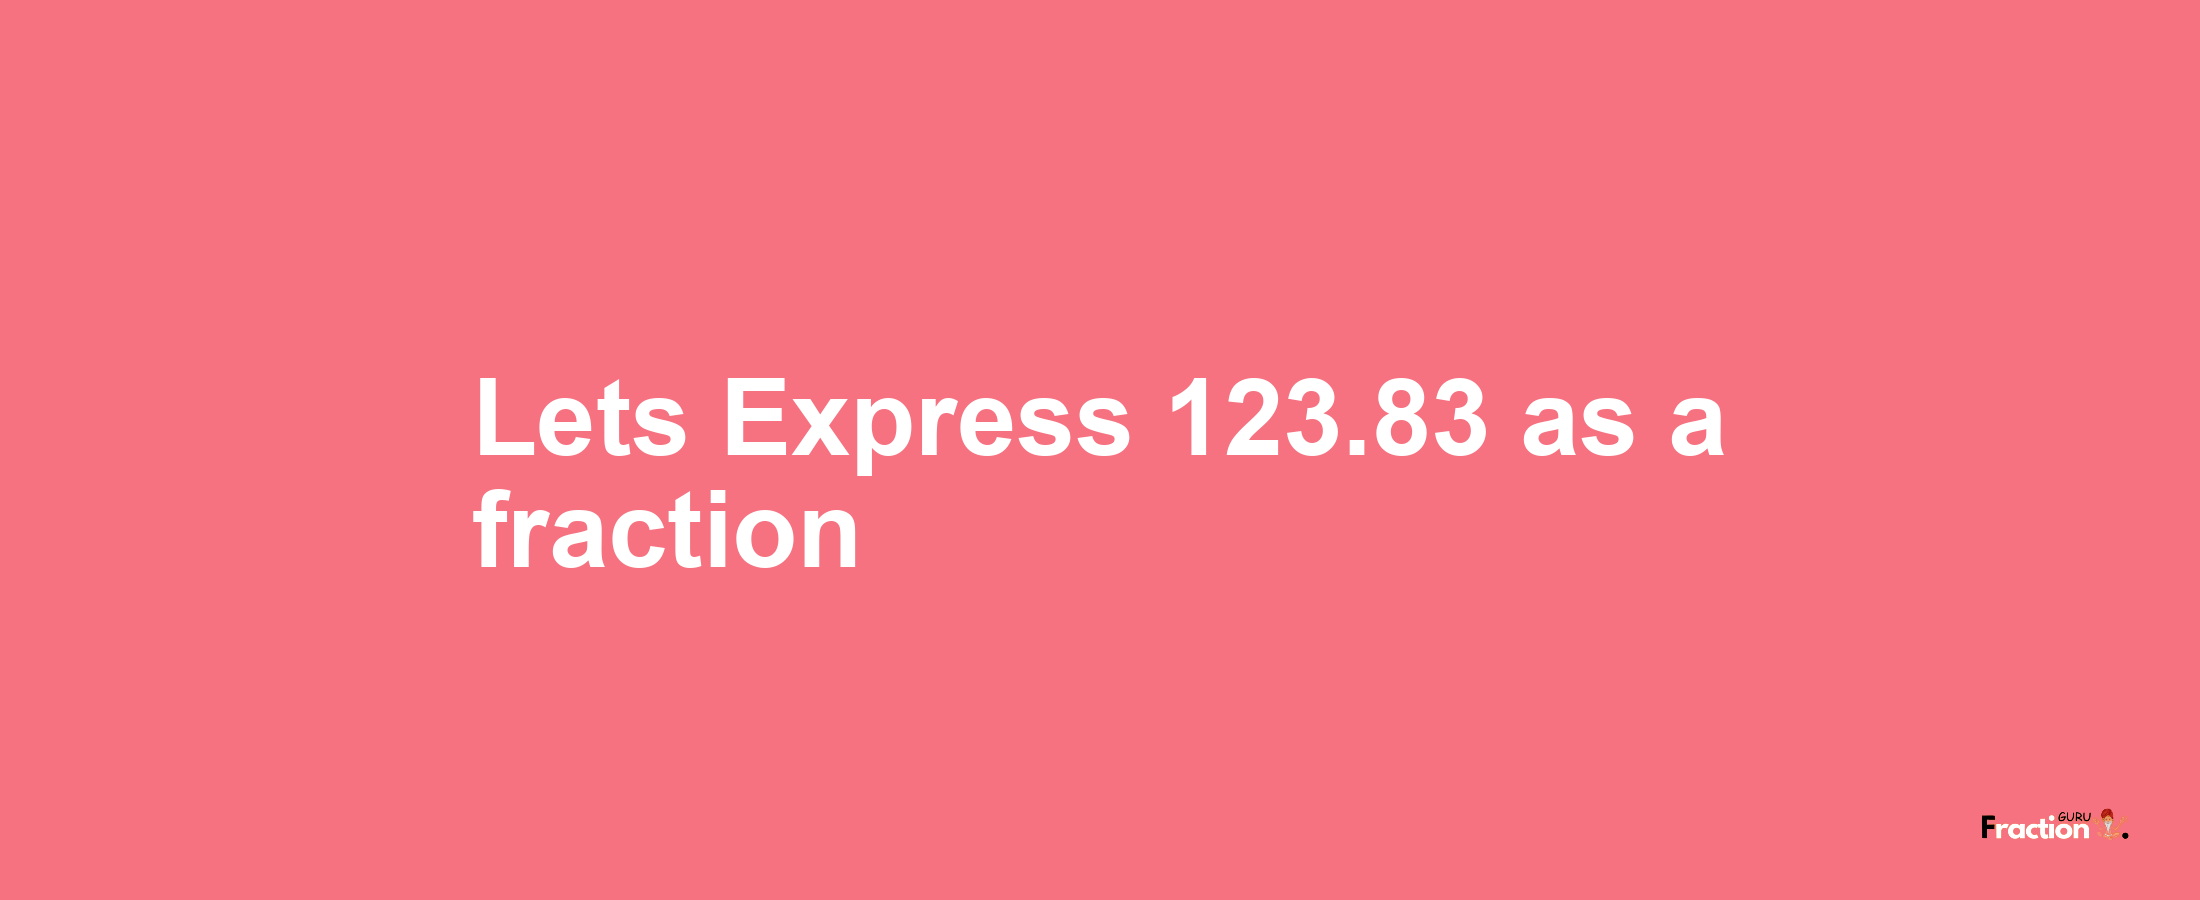 Lets Express 123.83 as afraction